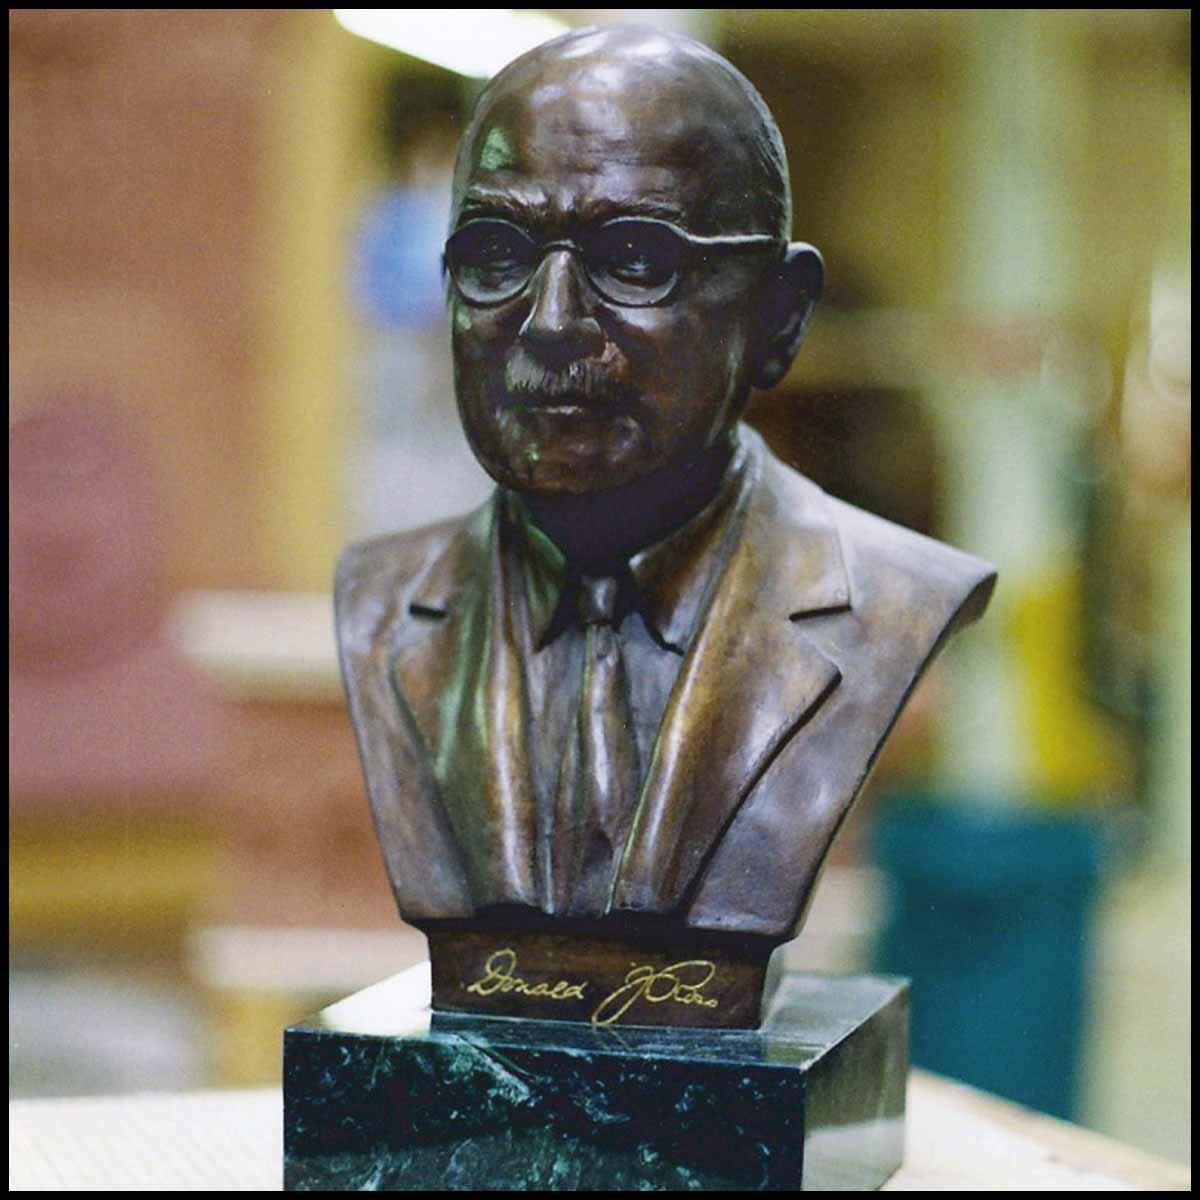 photo of bronze-colored sculpture bust of Donald Ross on black square base on wood work table